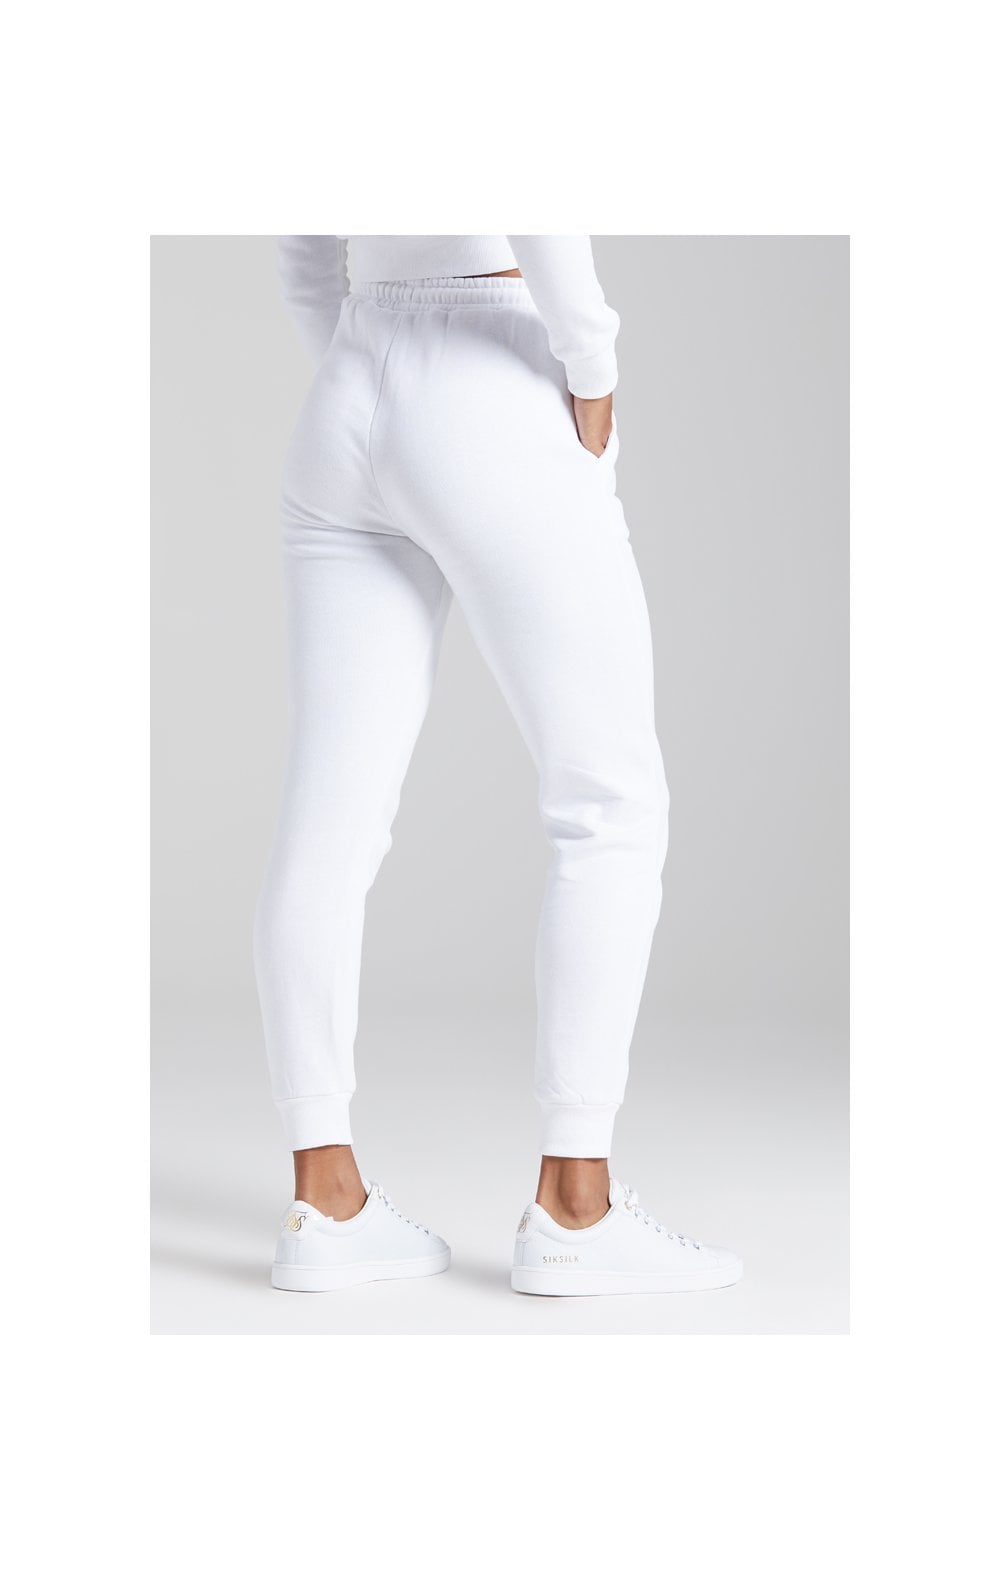 Load image into Gallery viewer, SikSilk Prestige Joggers - White (2)